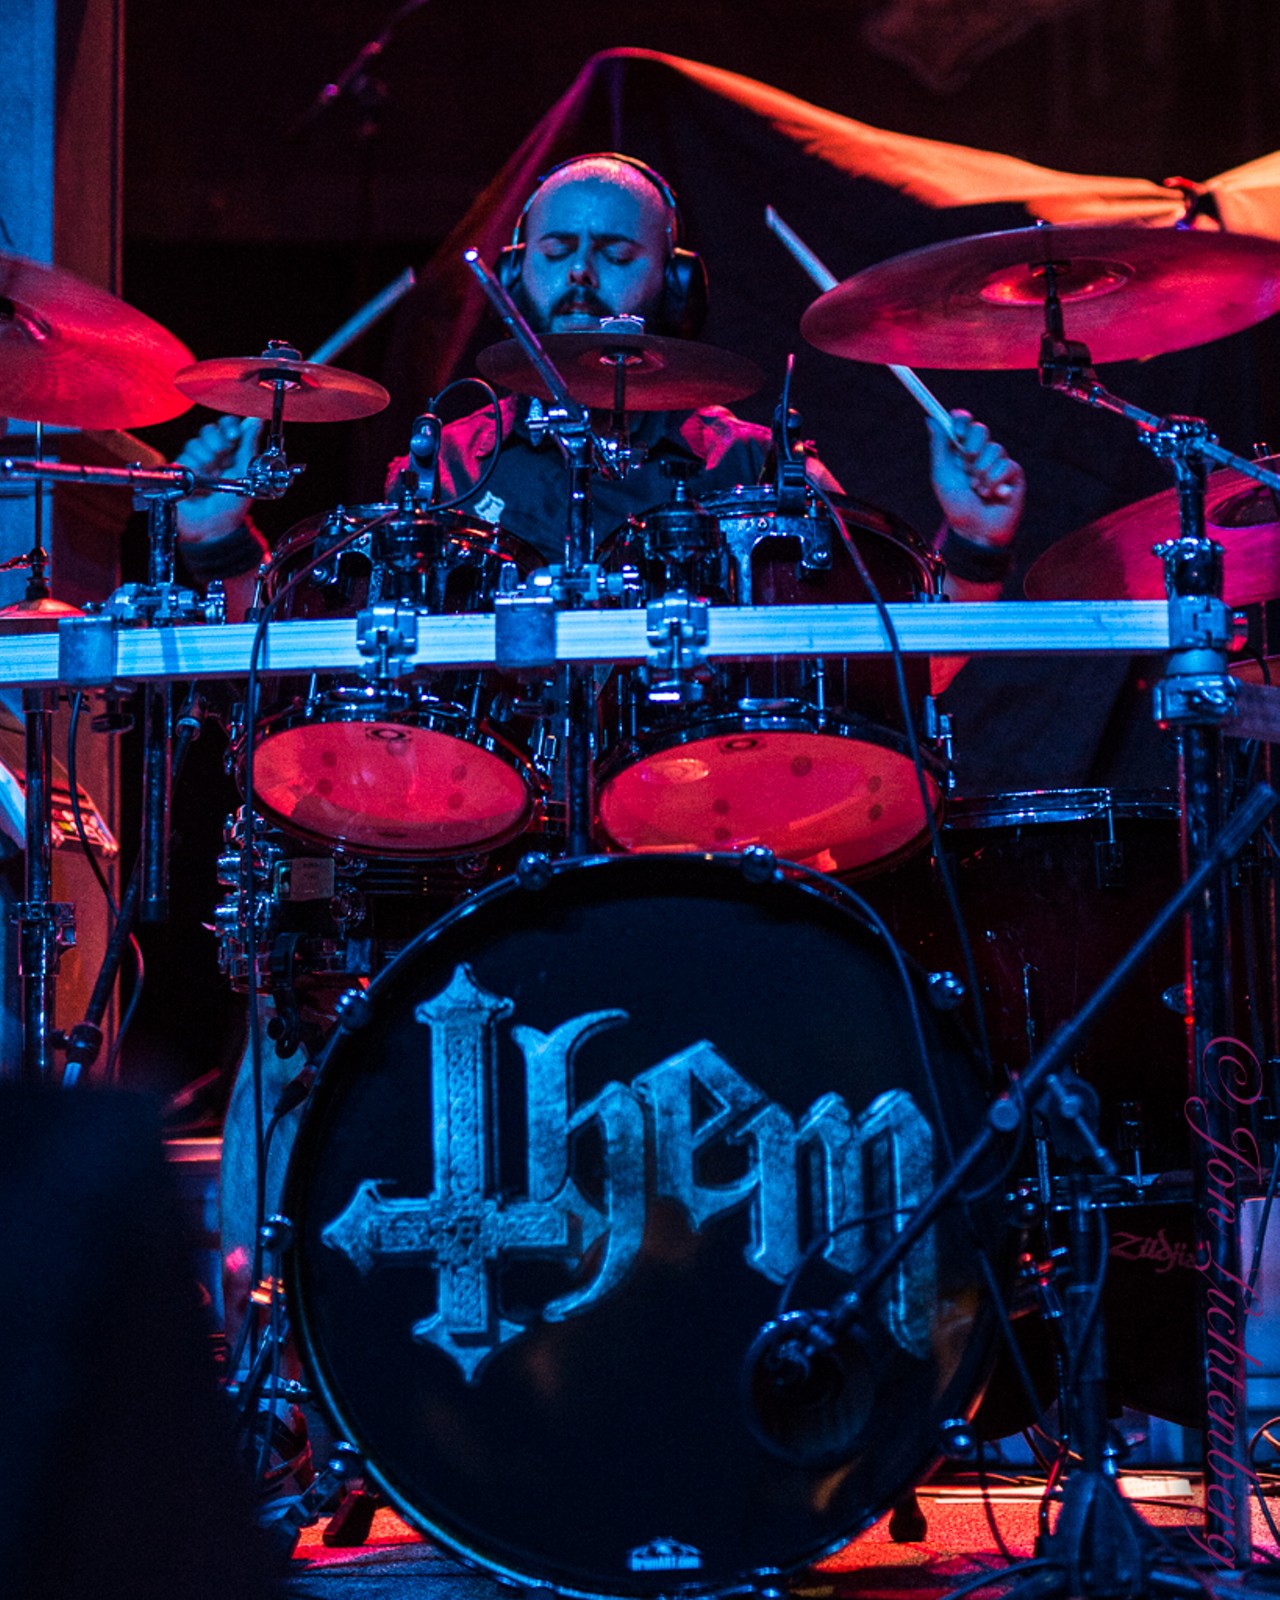 Helloween and Them Performing at the Agora